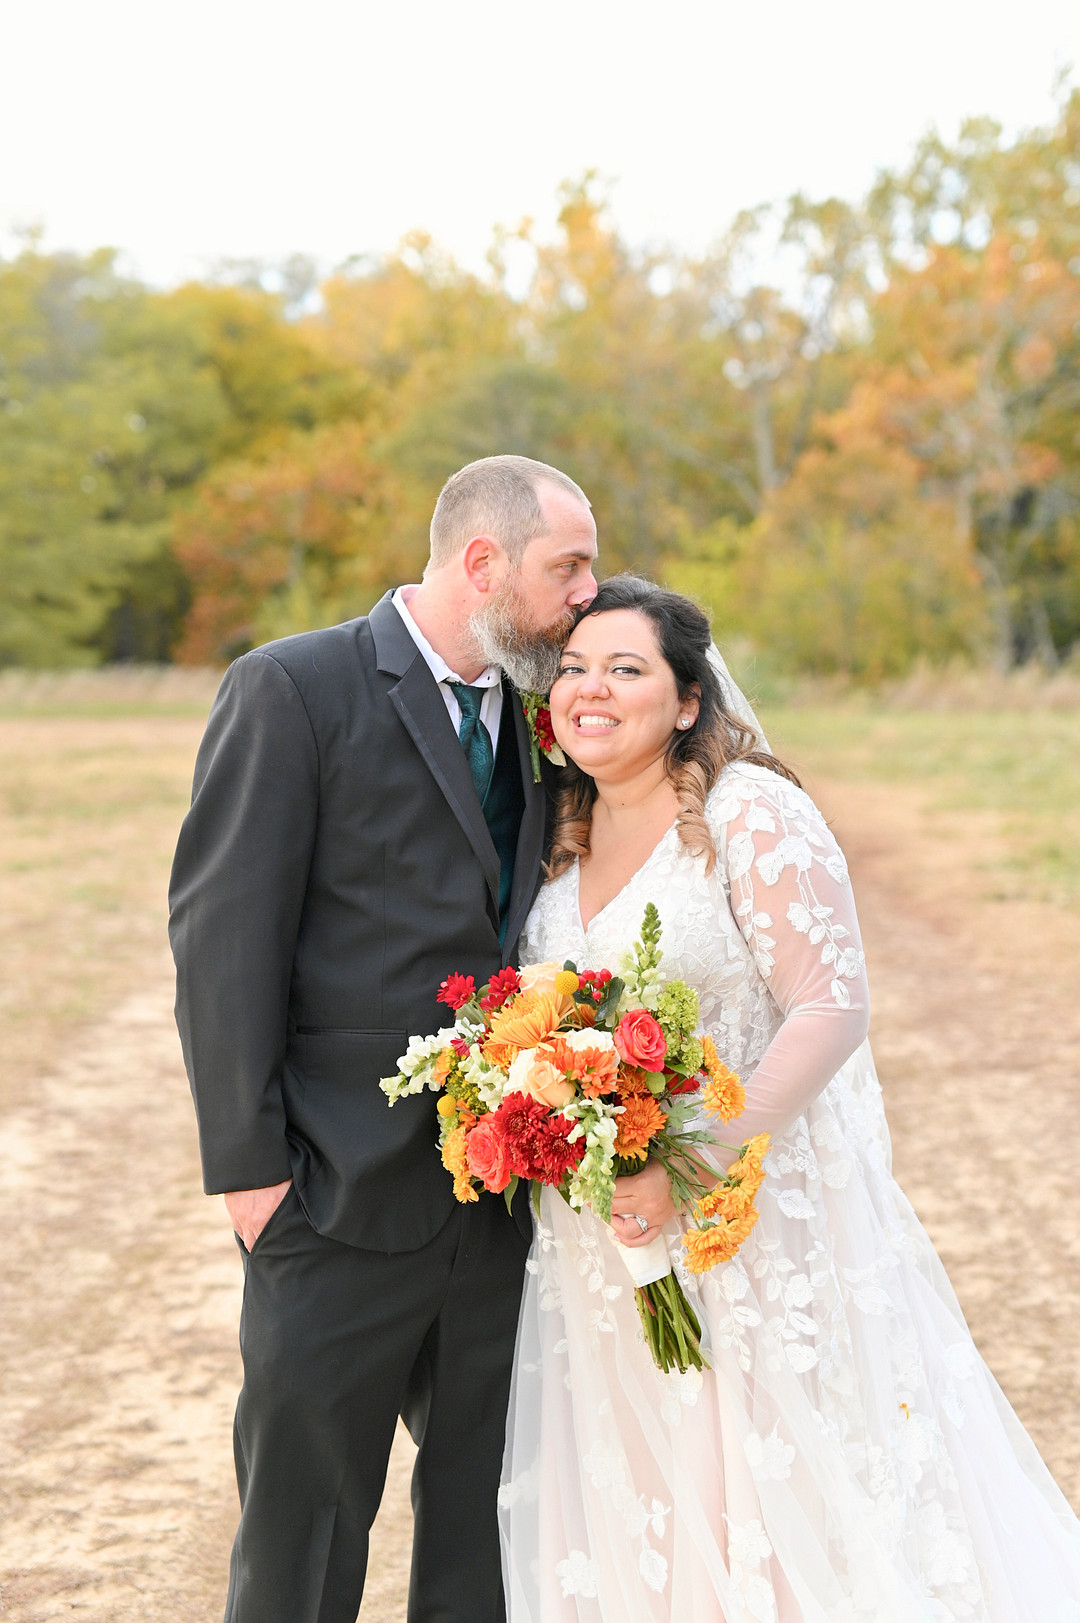 Halloween Themed Wedding At An Orchard 85